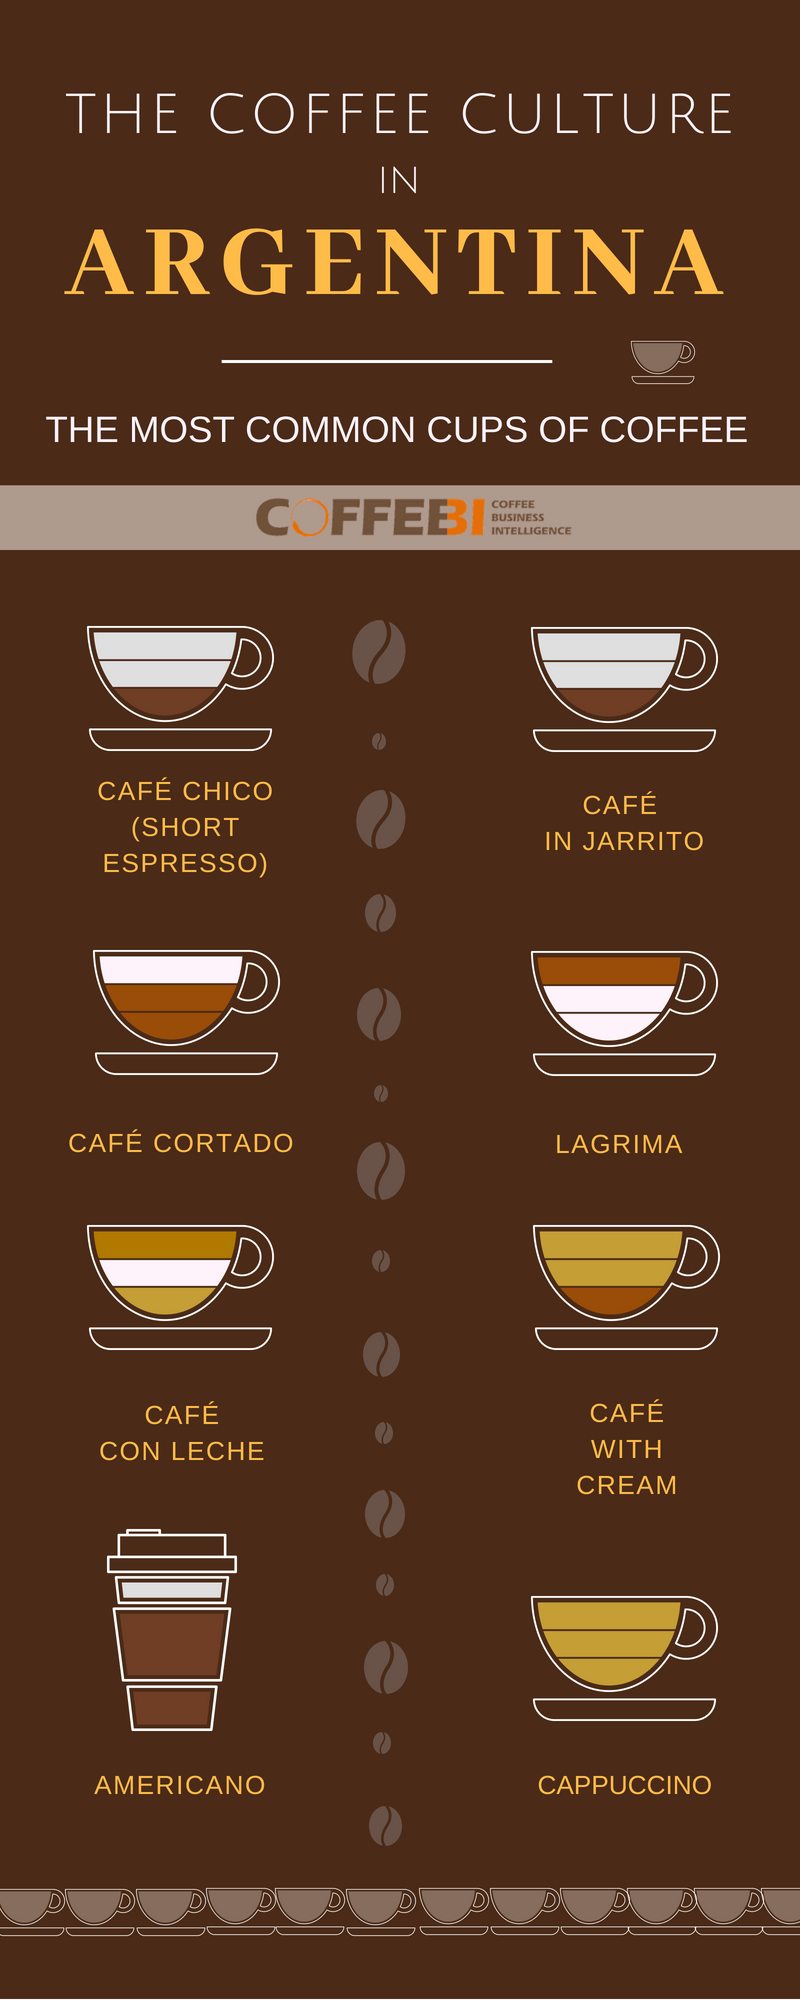 Espresso? It is the Top Choice for Argentinians